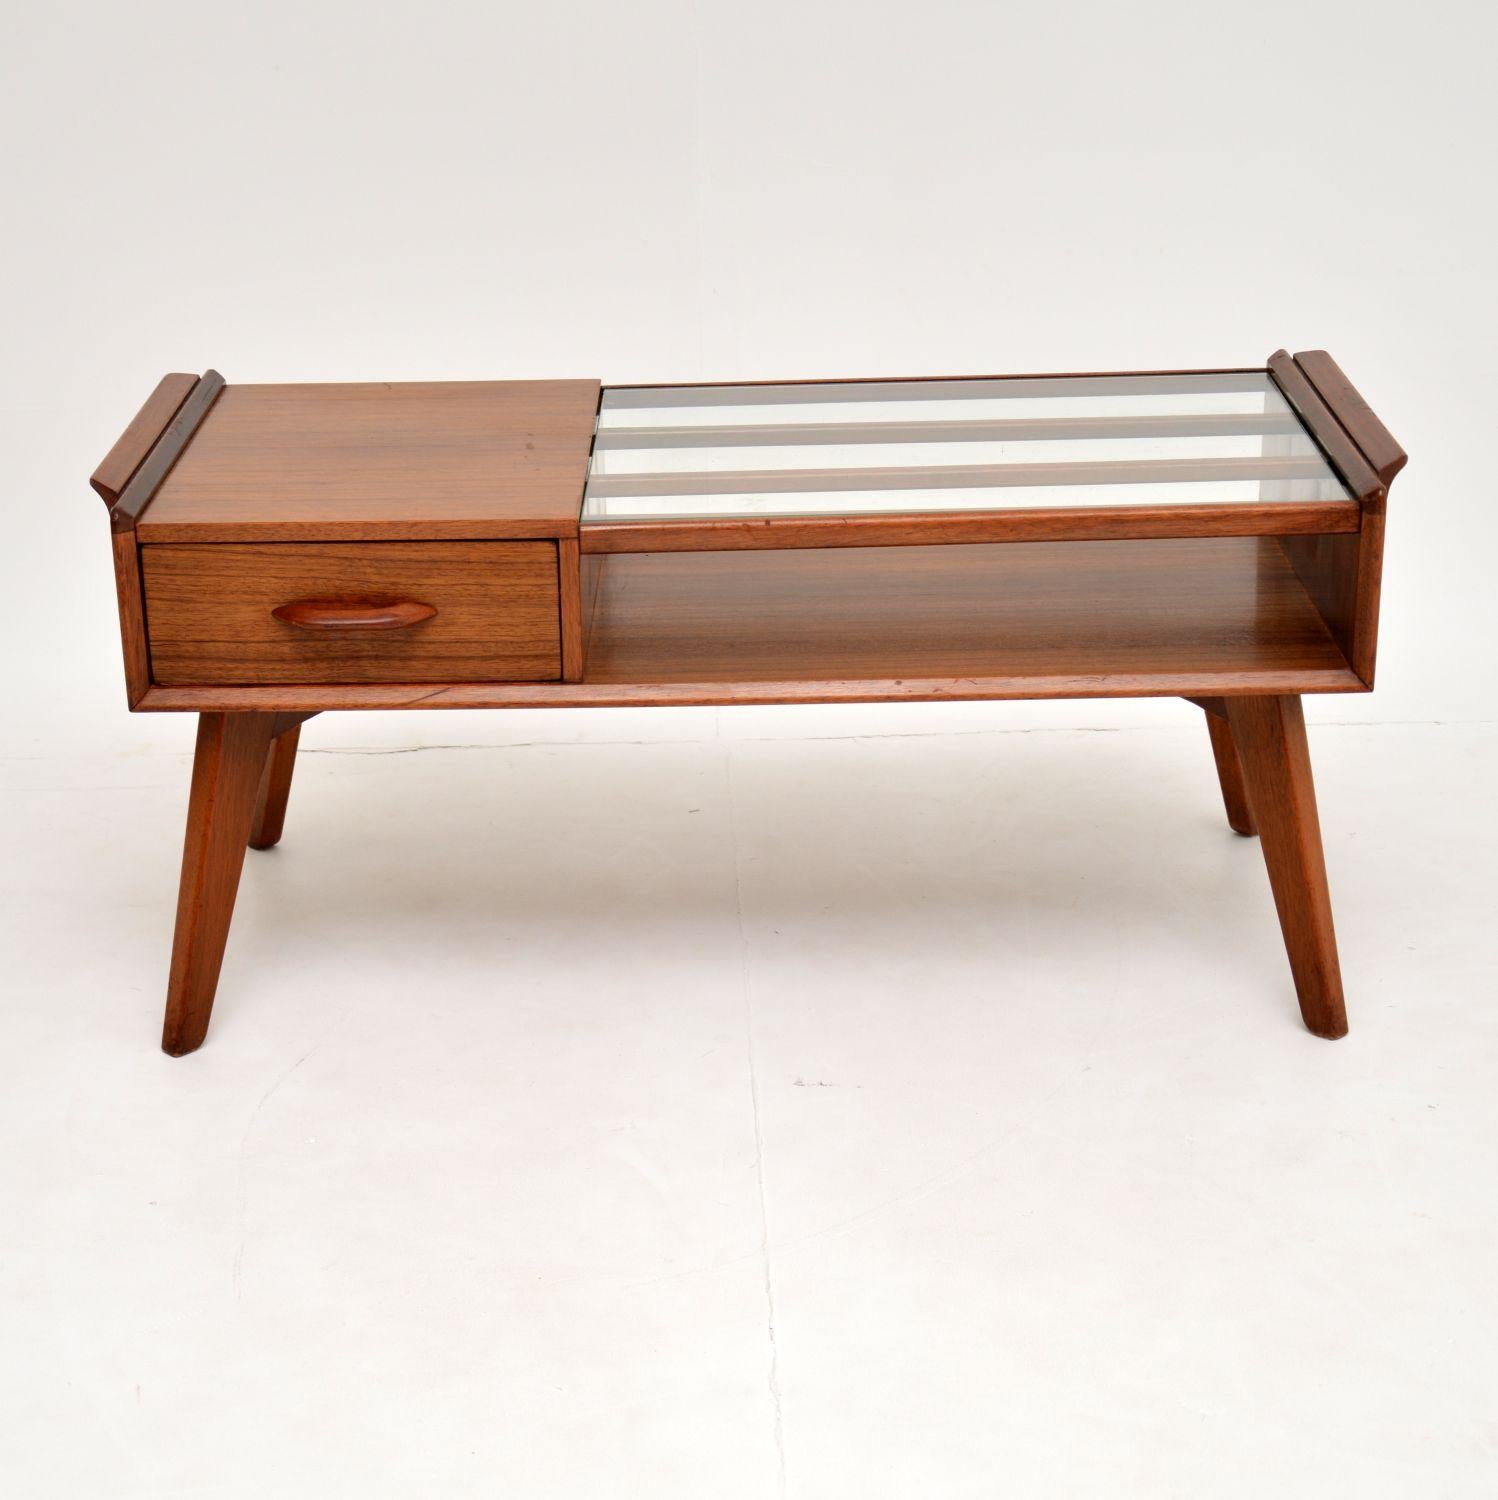 A beautifully styled vintage coffee table by G- Plan, this dates from circa 1950s-1960s. It’s of great quality, made from tola wood, with an inset glass top.

This is in nice vintage condition, with some minor surface wear here and there. This in